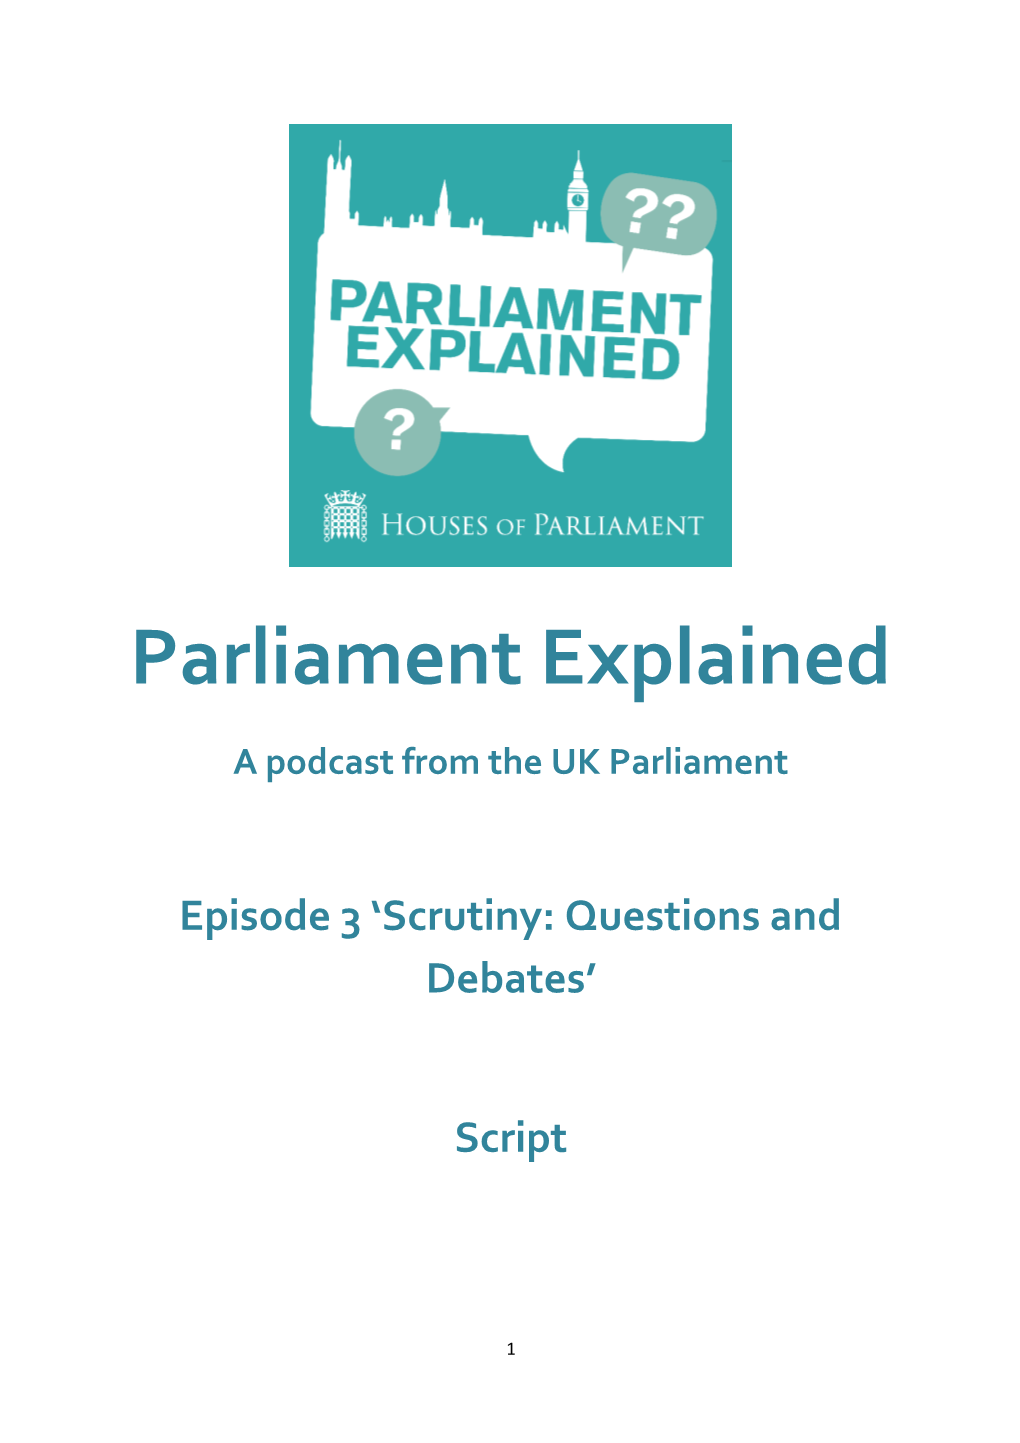 Parliament Explained Episode 3 - Scrutiny: Questions and Debates